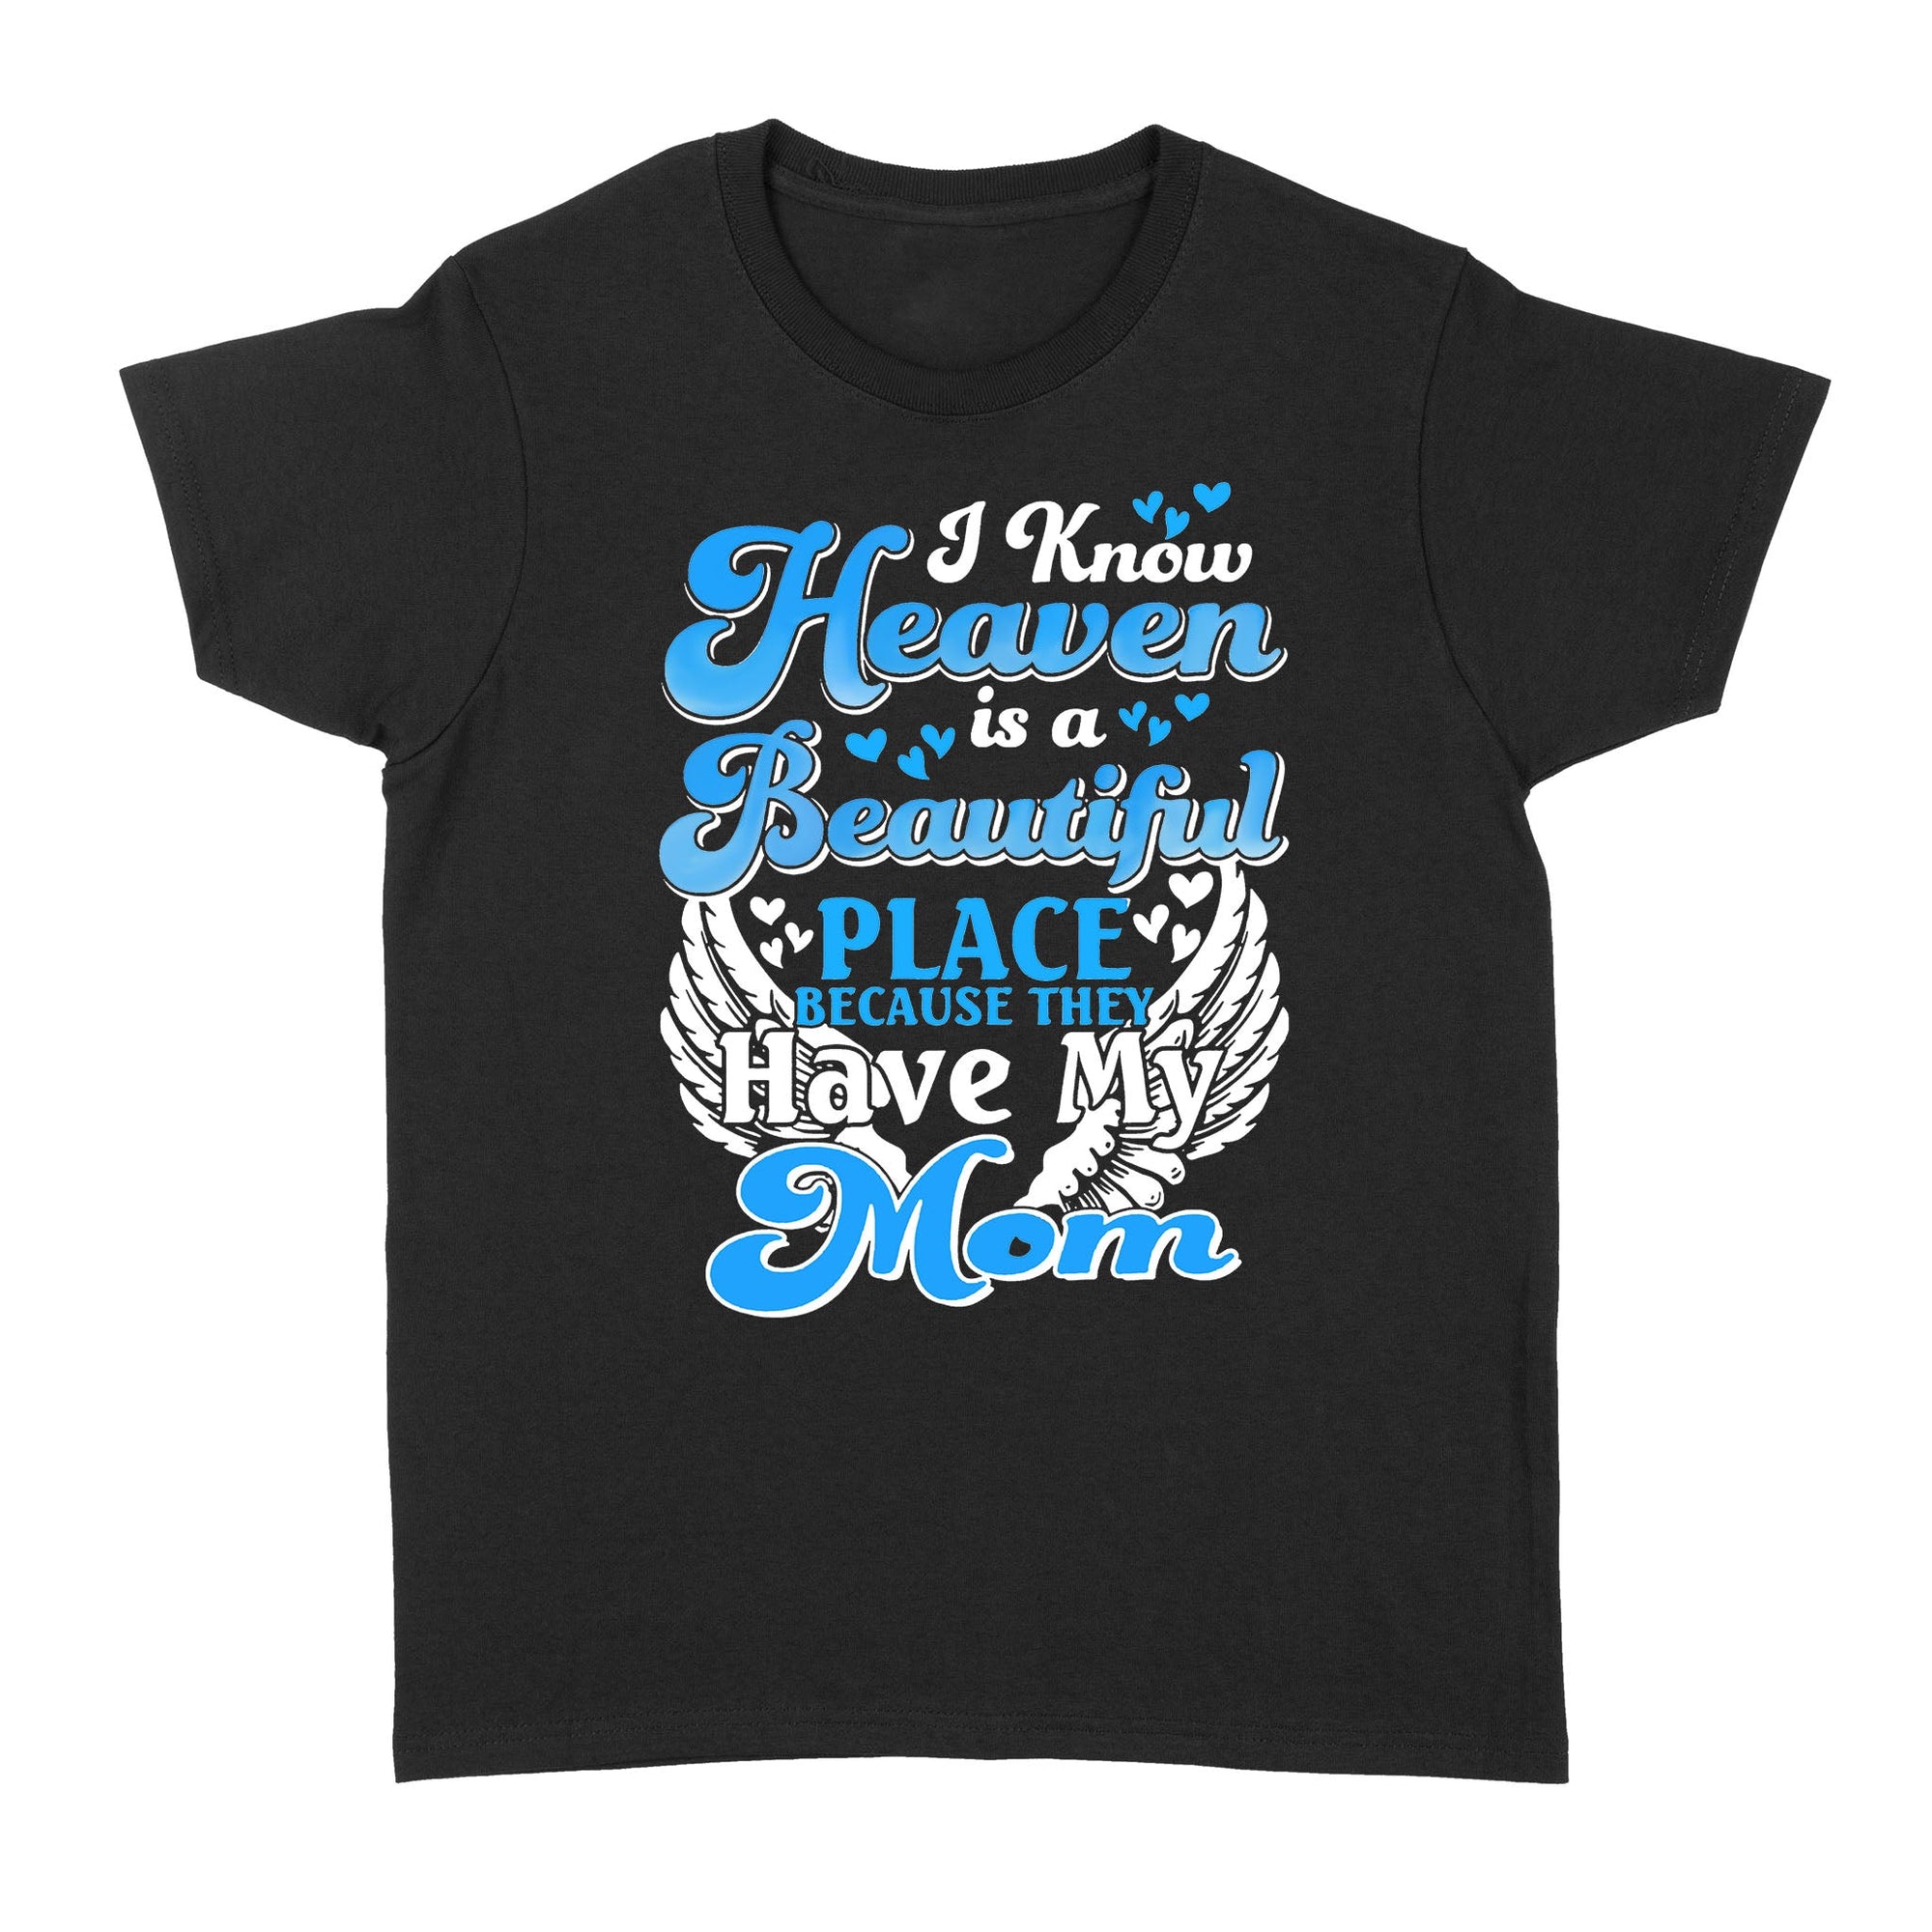 I Know Heaven Is A Beautiful Place Because They Have My Mom Women's T-shirt